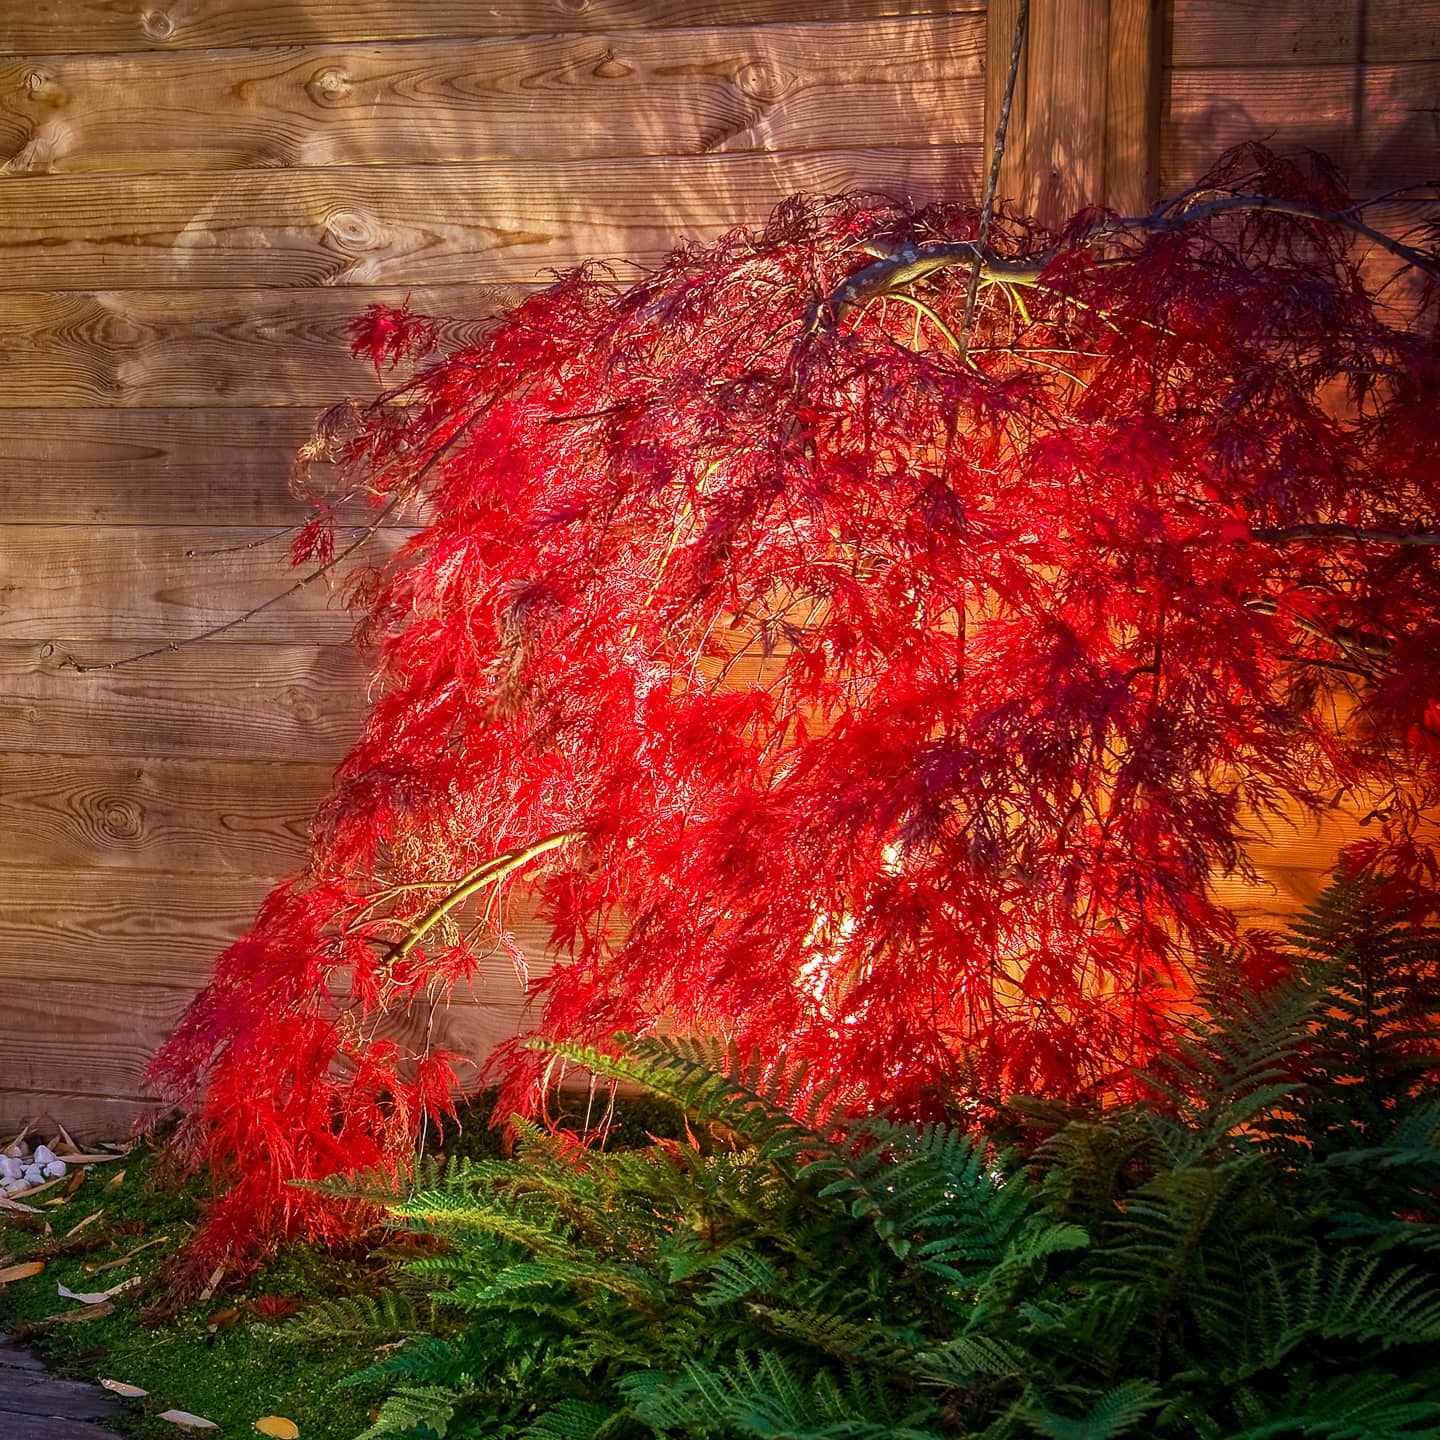 A vibrant red japanese maple tree stands with landscape lighting under it